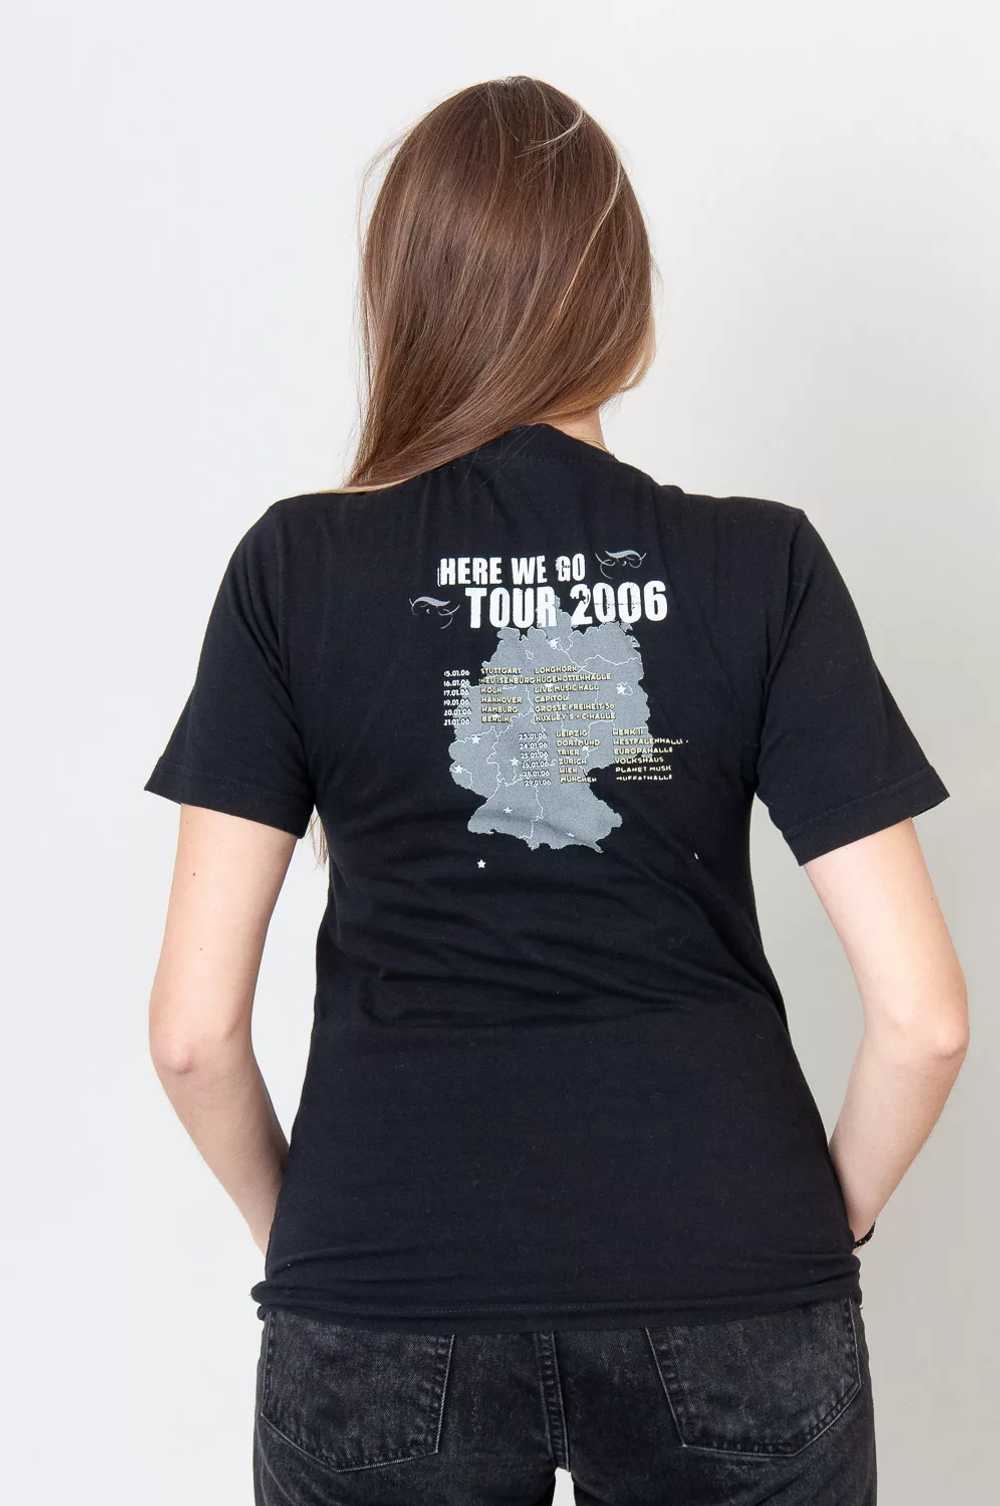 Us 5 band shirt Black With Here We Go Tour 2006 P… - image 2